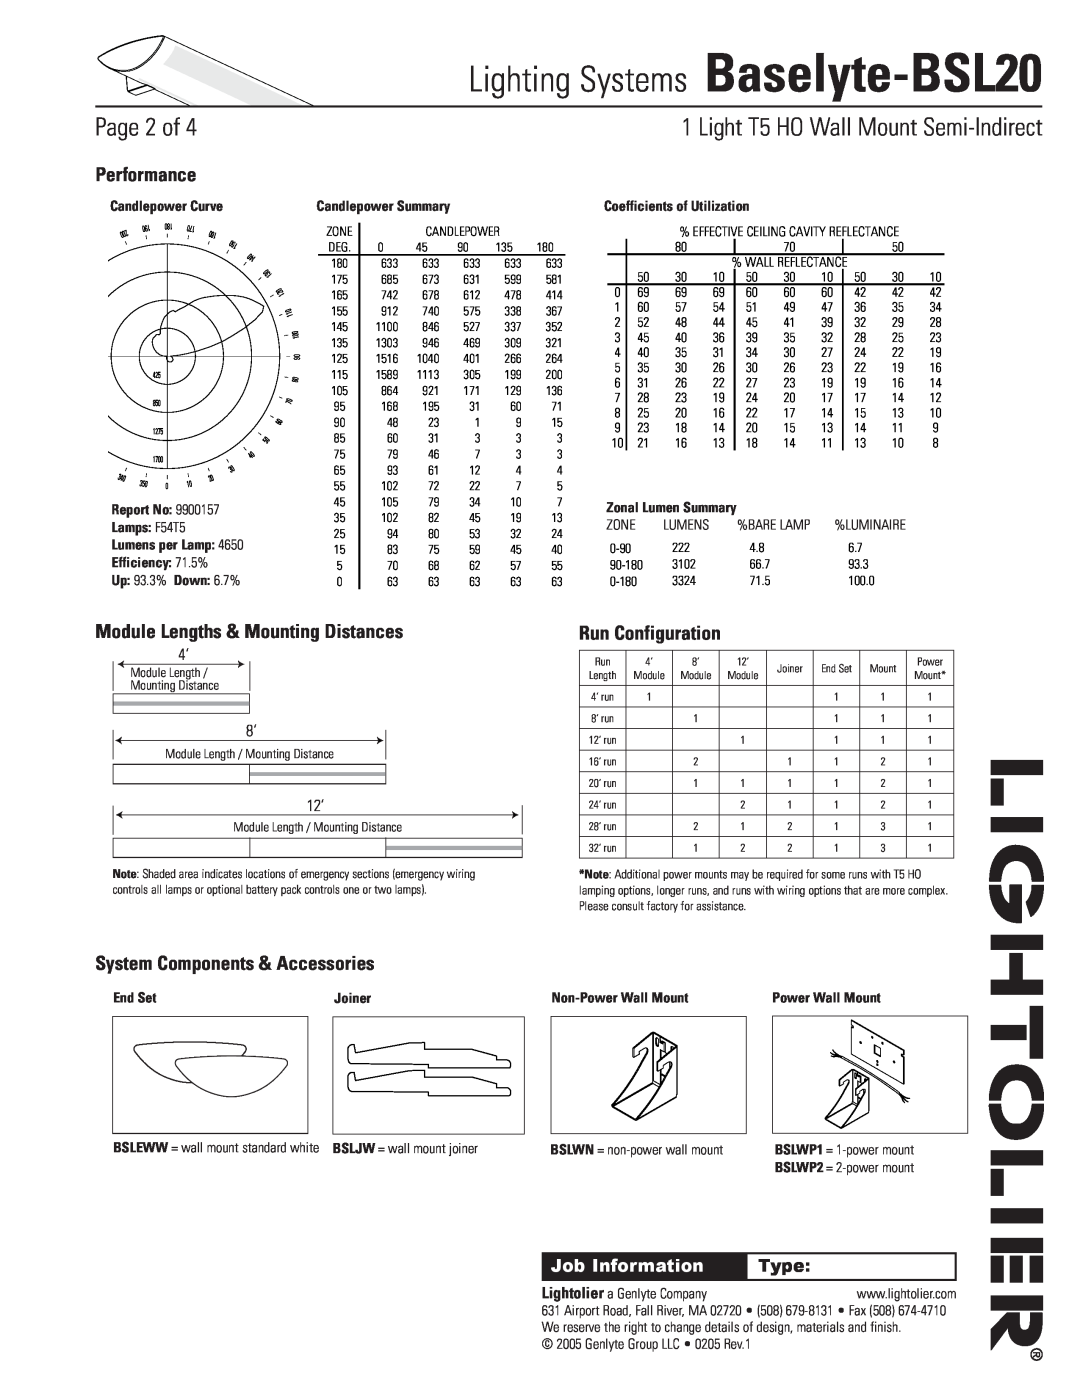 Lightolier Lighting Systems Baselyte-BSL20, Page of,  Light T5 HO Wall Mount Semi-Indirect, Performance, Type, End Set 